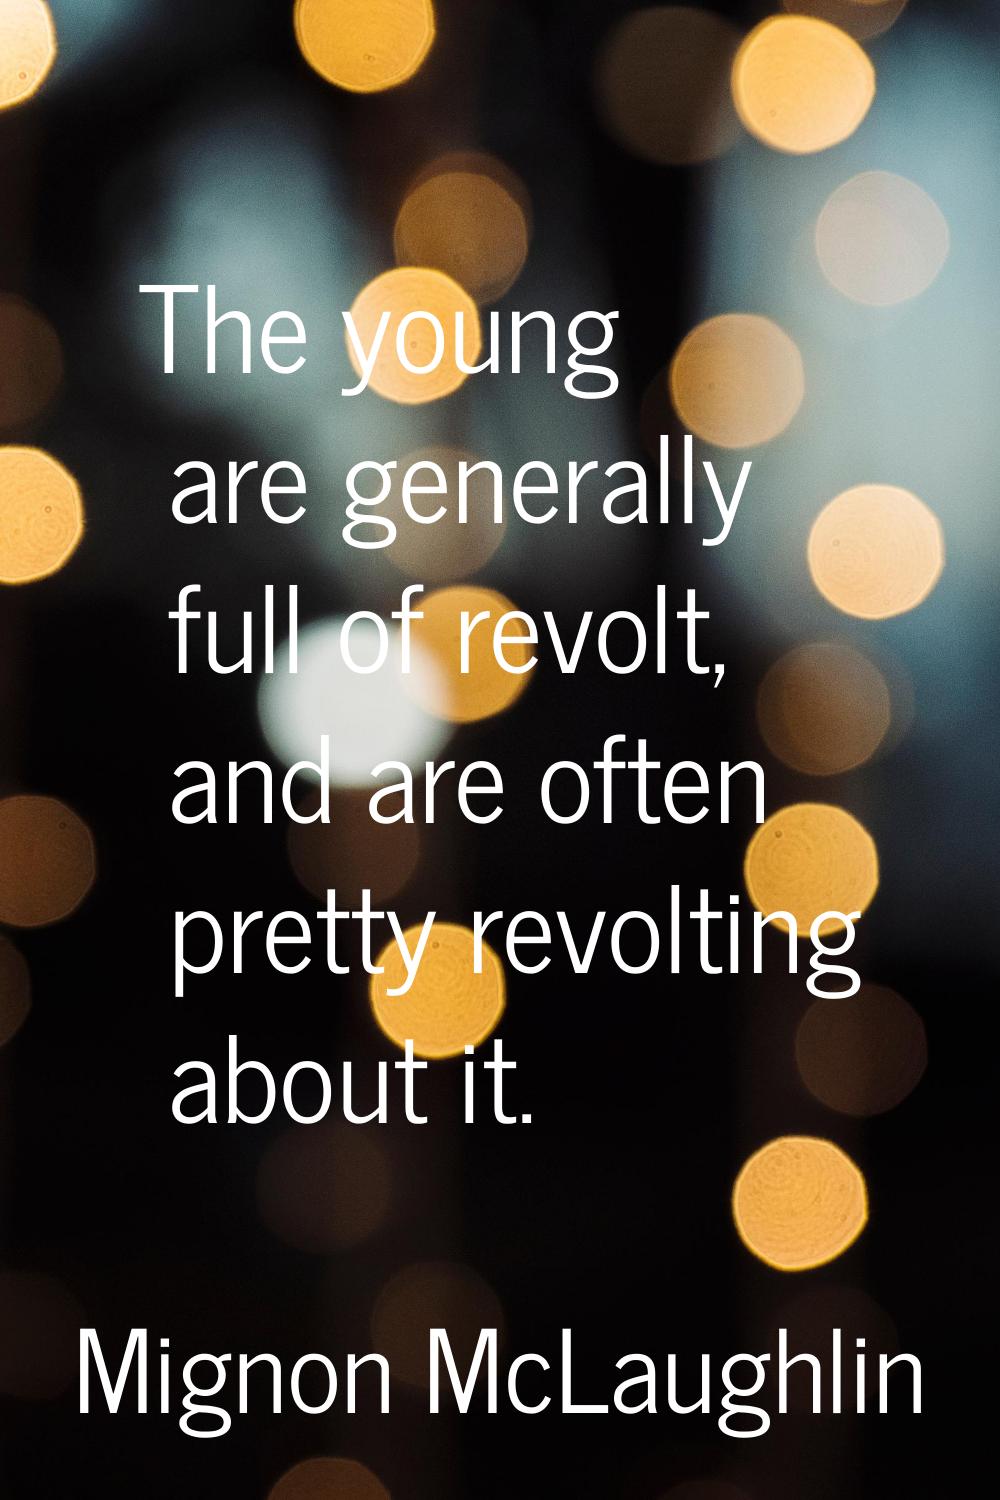 The young are generally full of revolt, and are often pretty revolting about it.